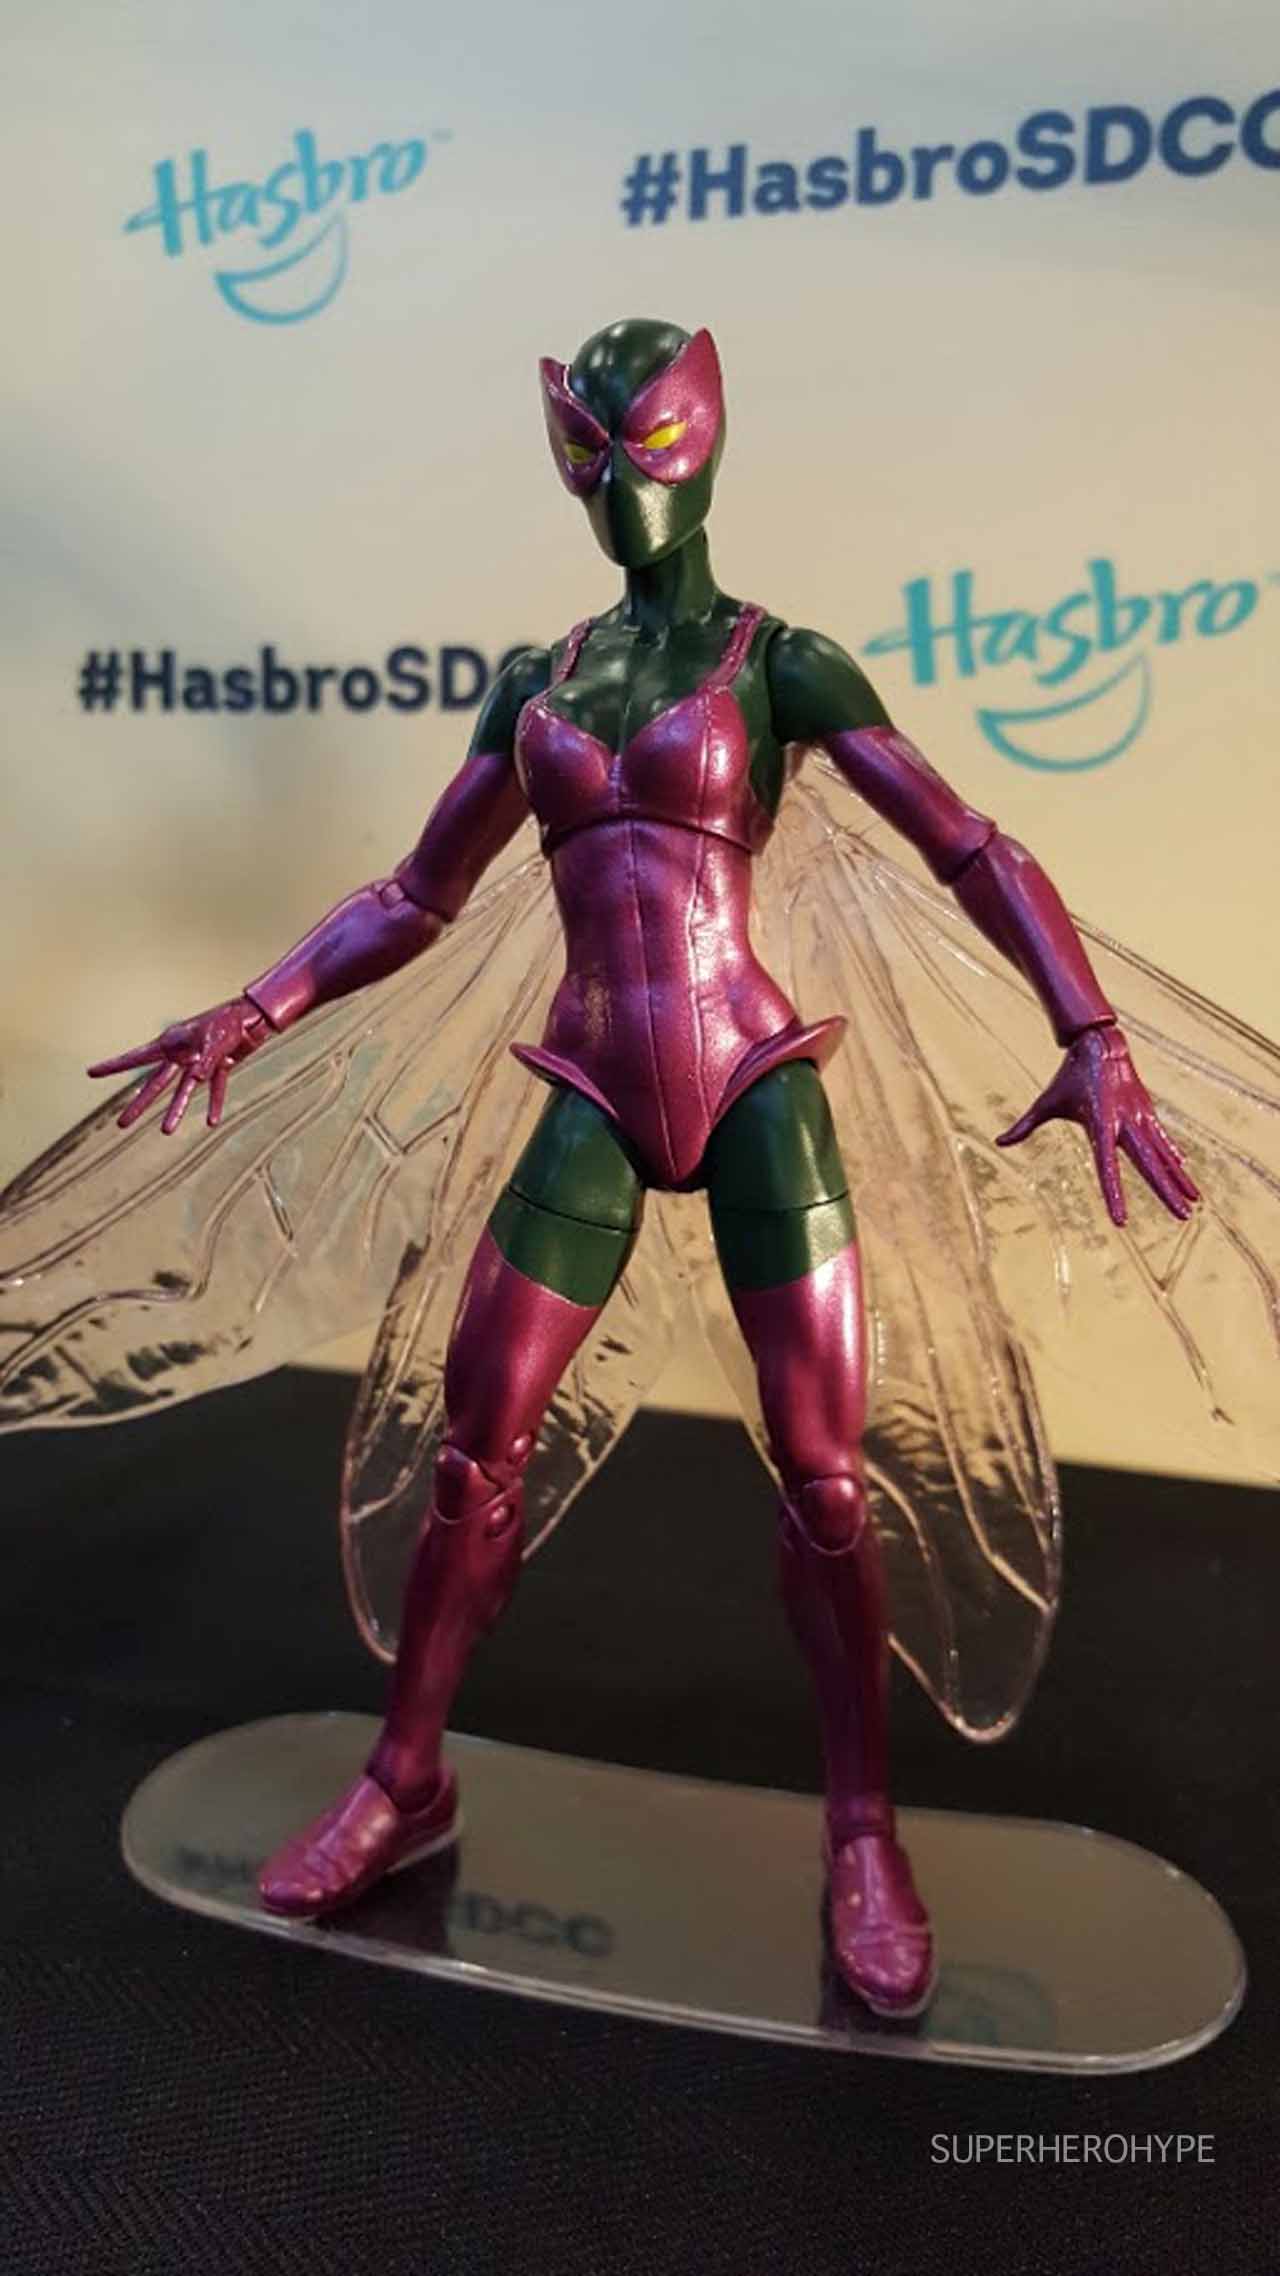 Hasbro ComicCon Photos See the First Order and SpiderGwen Toys!